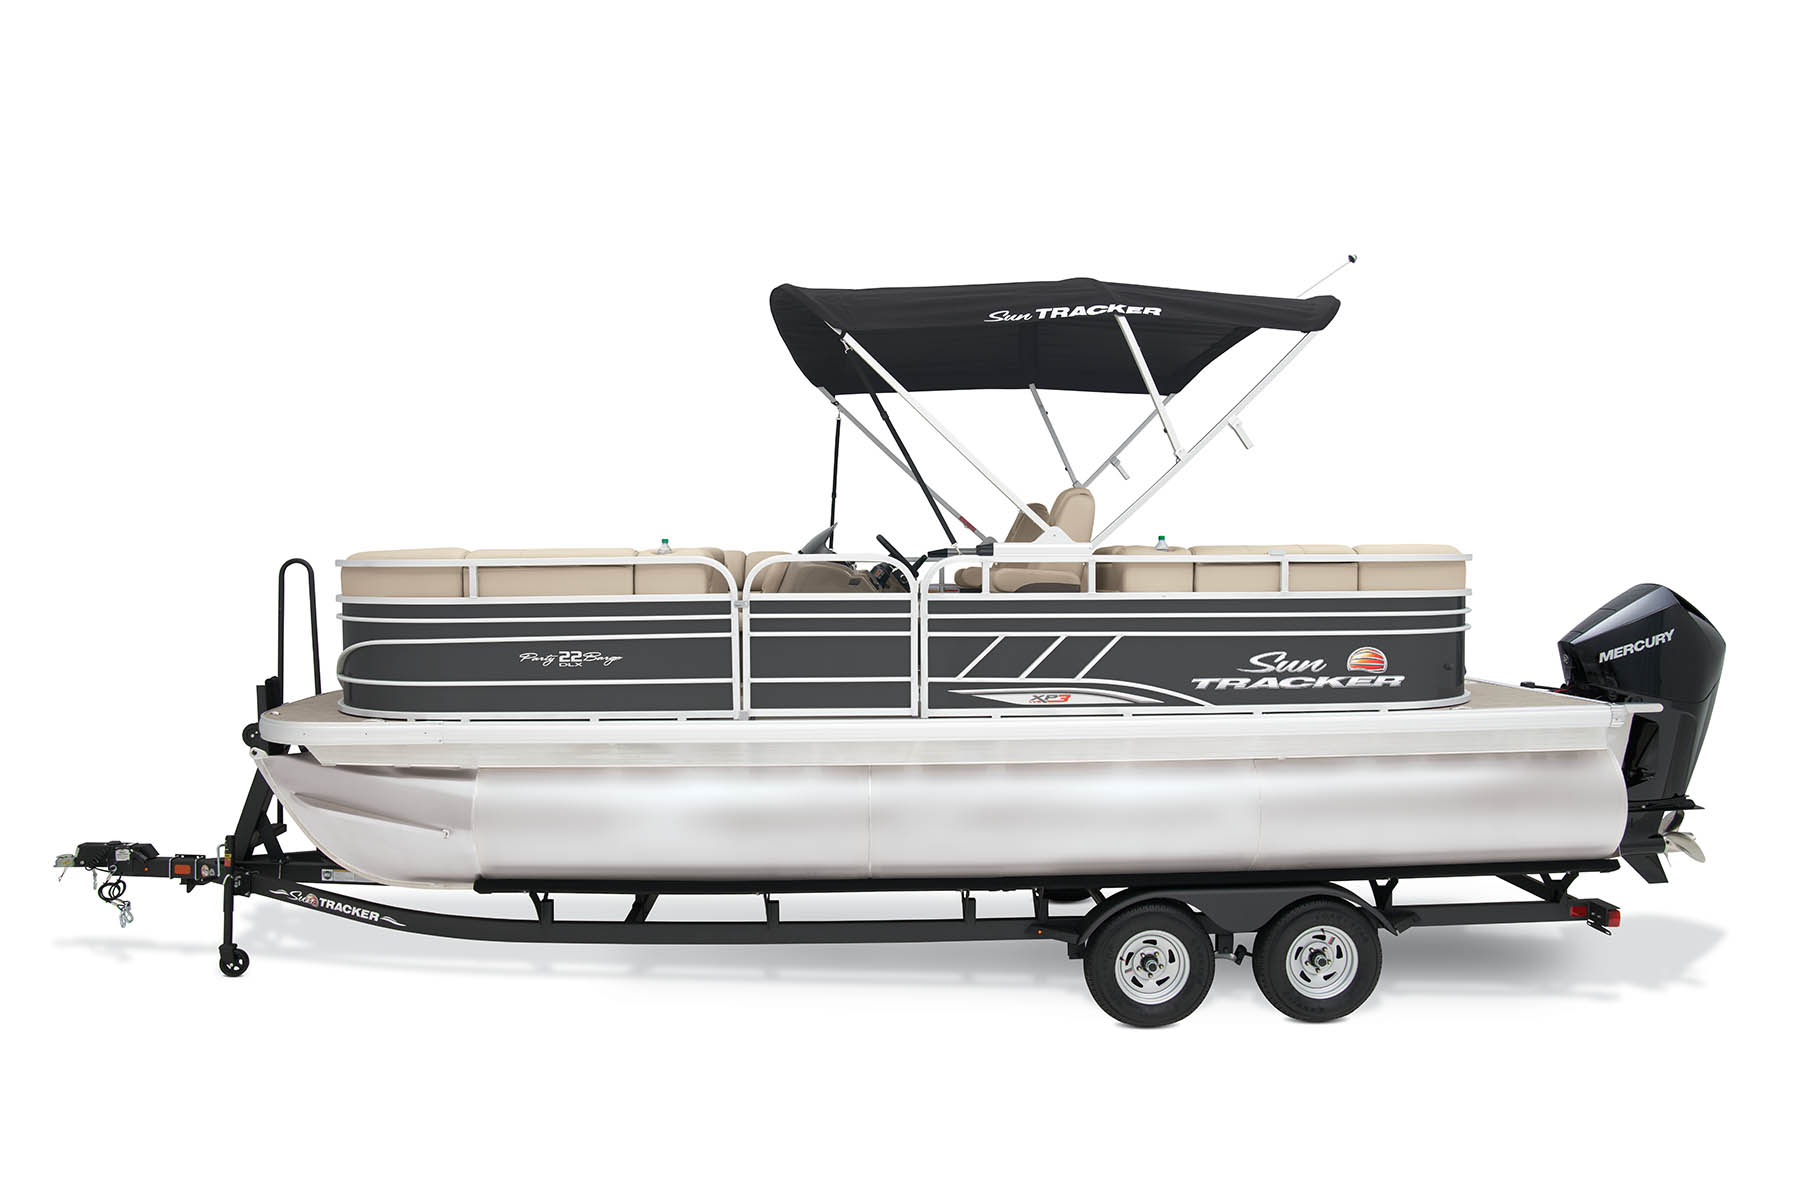 PARTY BARGE 22 XP3 SUN TRACKER Recreational Pontoon Boat